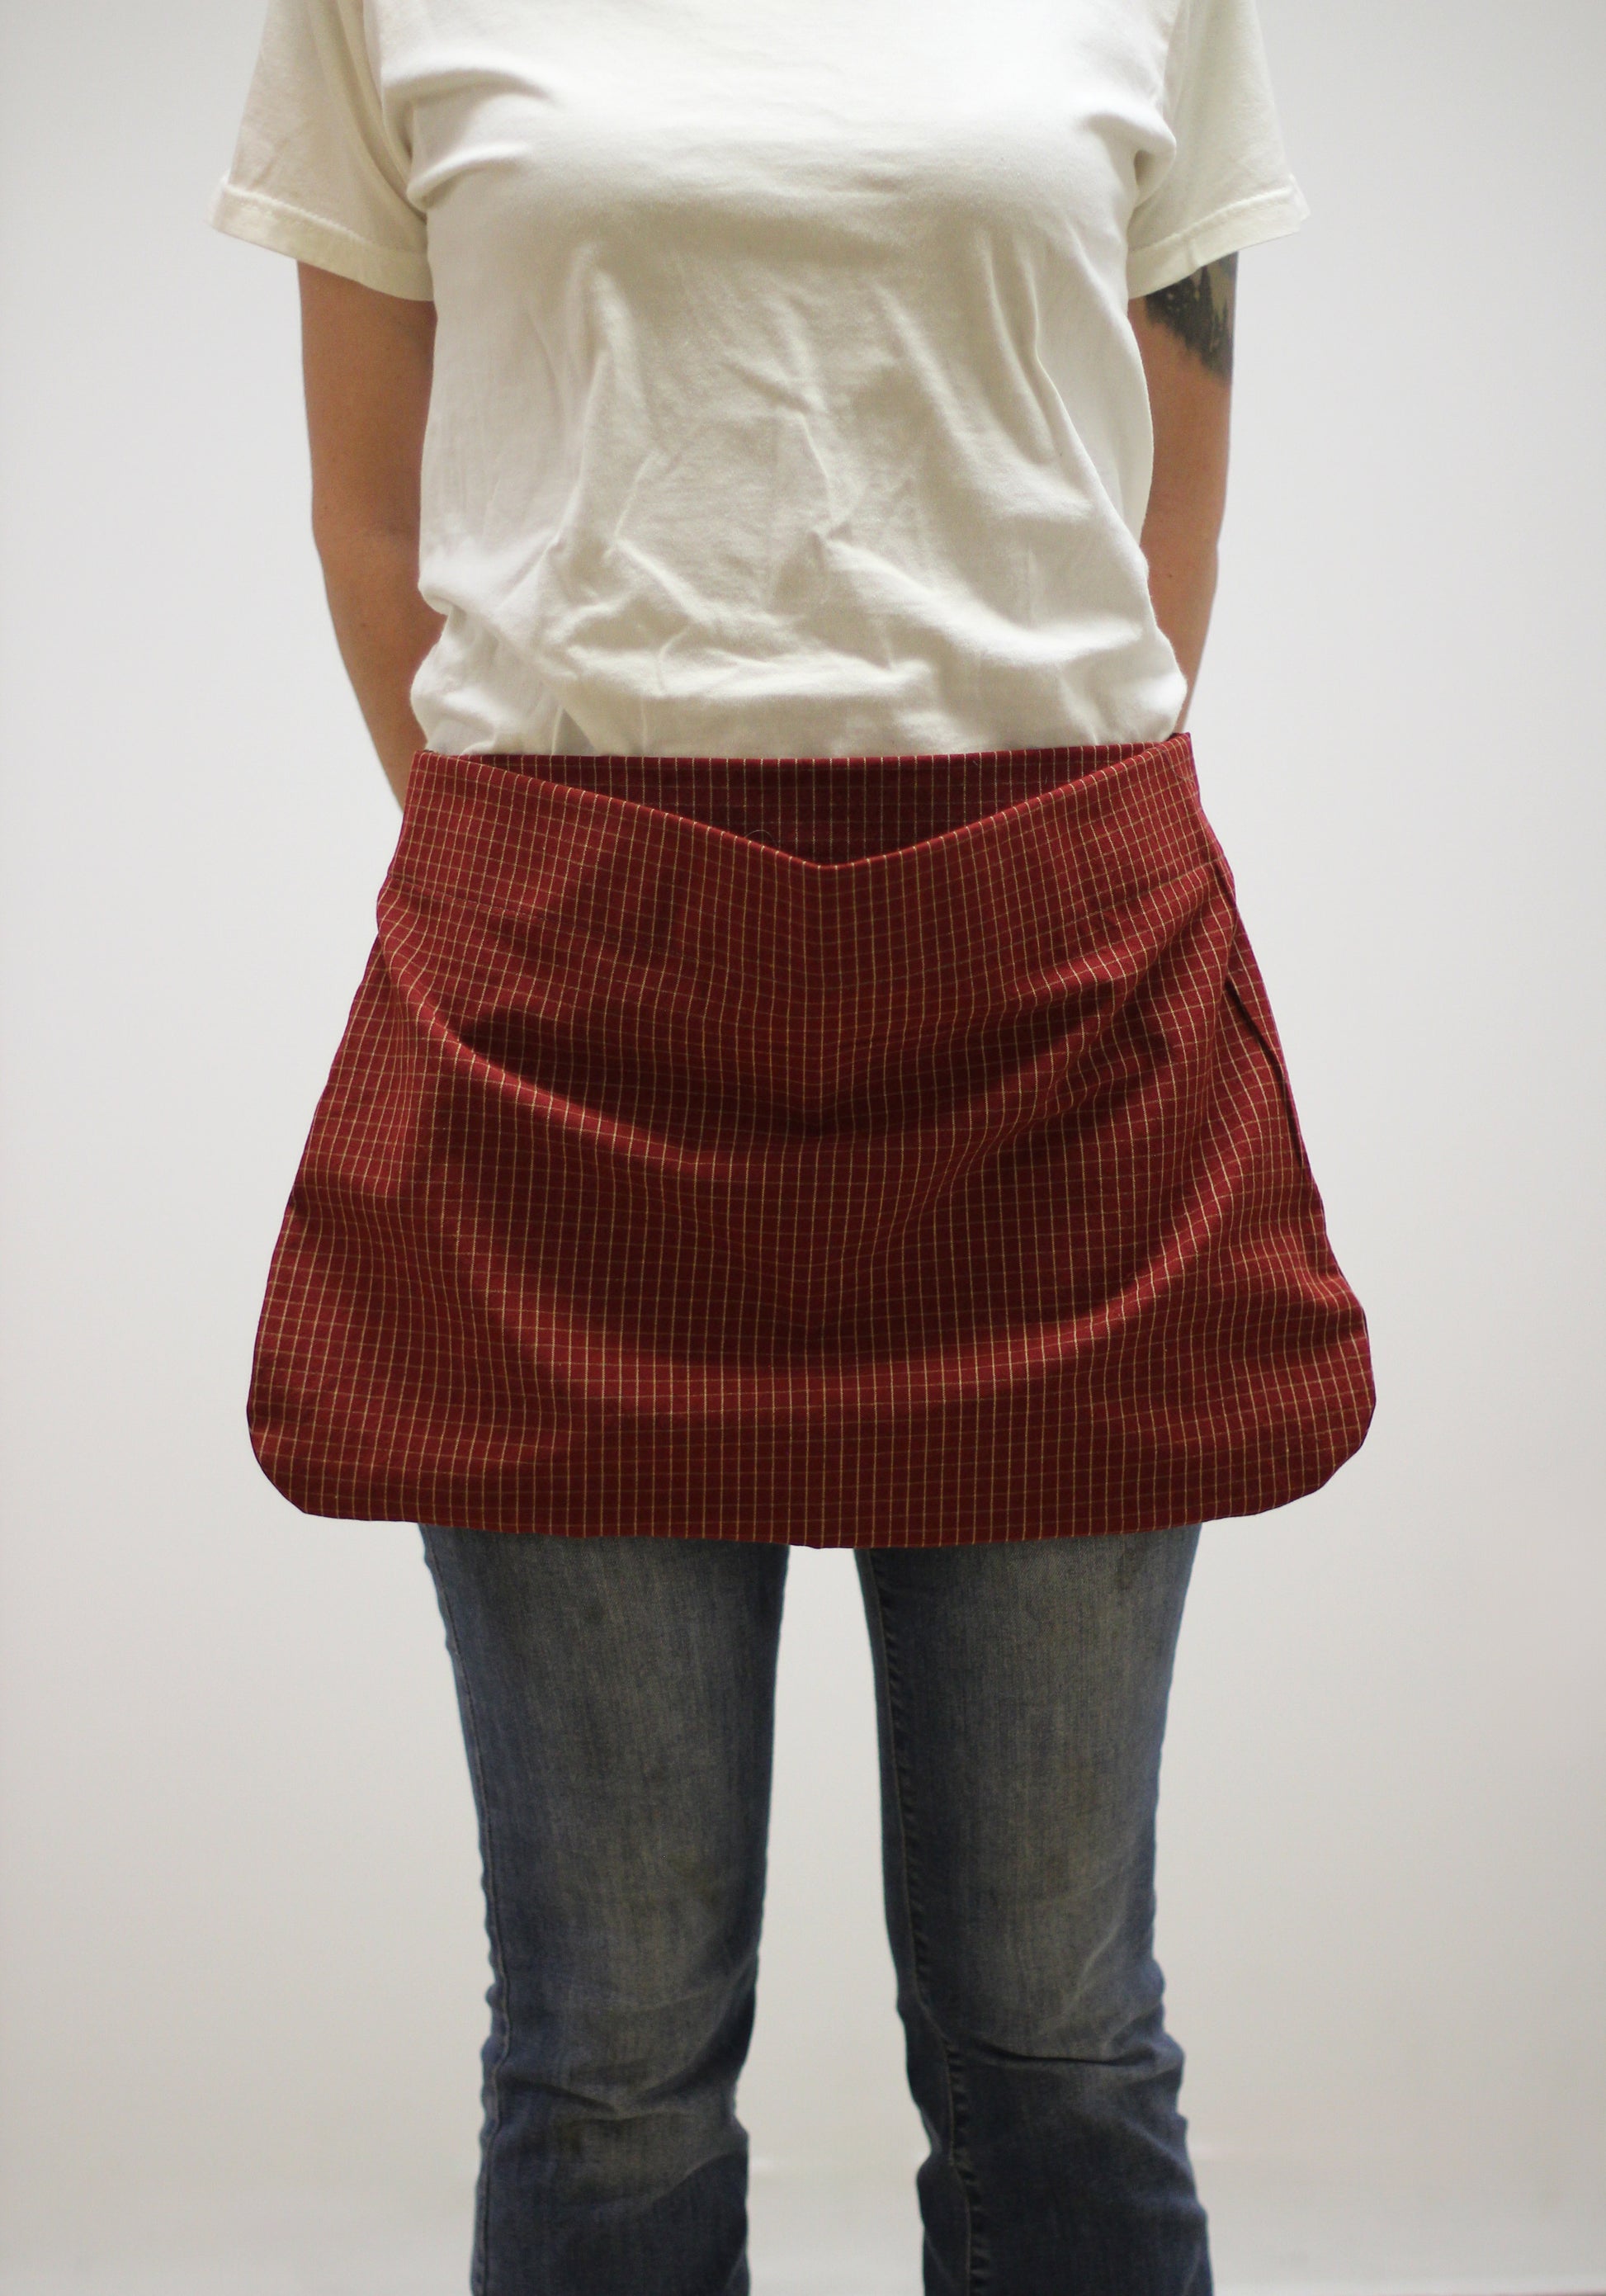 Pouch Apron in Homespun in red homespun